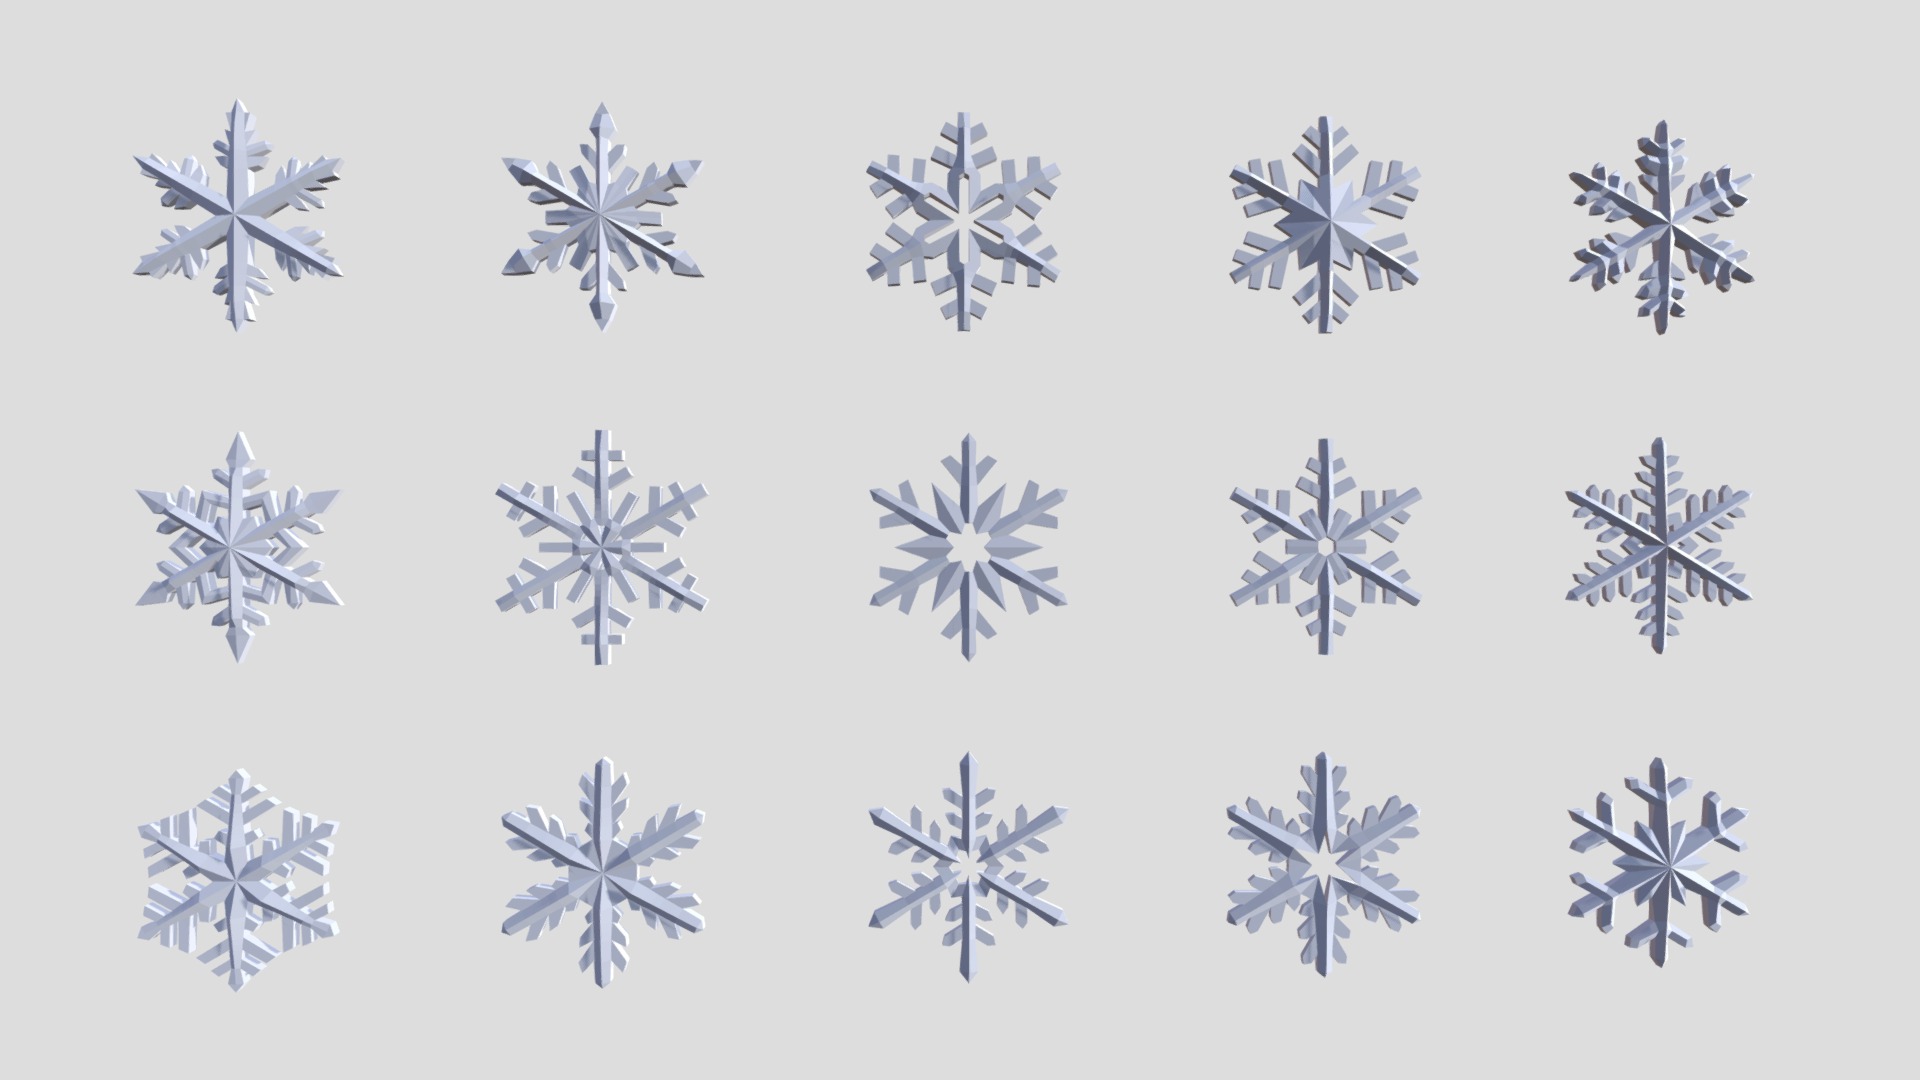 3D model 15 snowflakes - This is a 3D model of the 15 snowflakes. The 3D model is about background pattern.